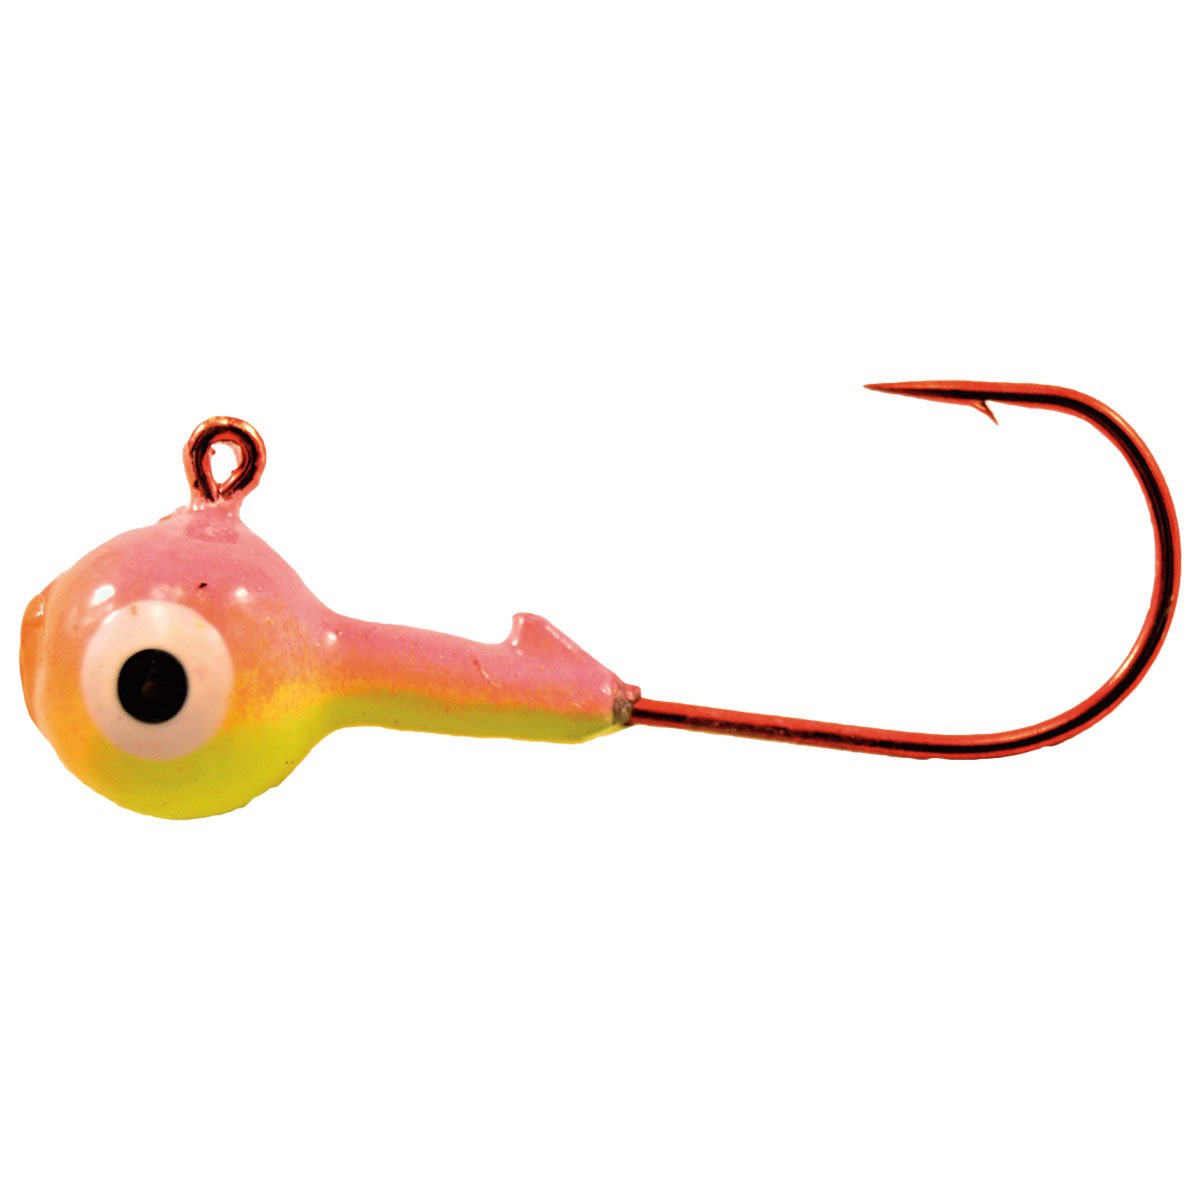 MUSTAD HOOKS 31022D GREEN & RED TUBE--8/0 HOOK-- STRIPER JIG LURE--COUNT IS  12